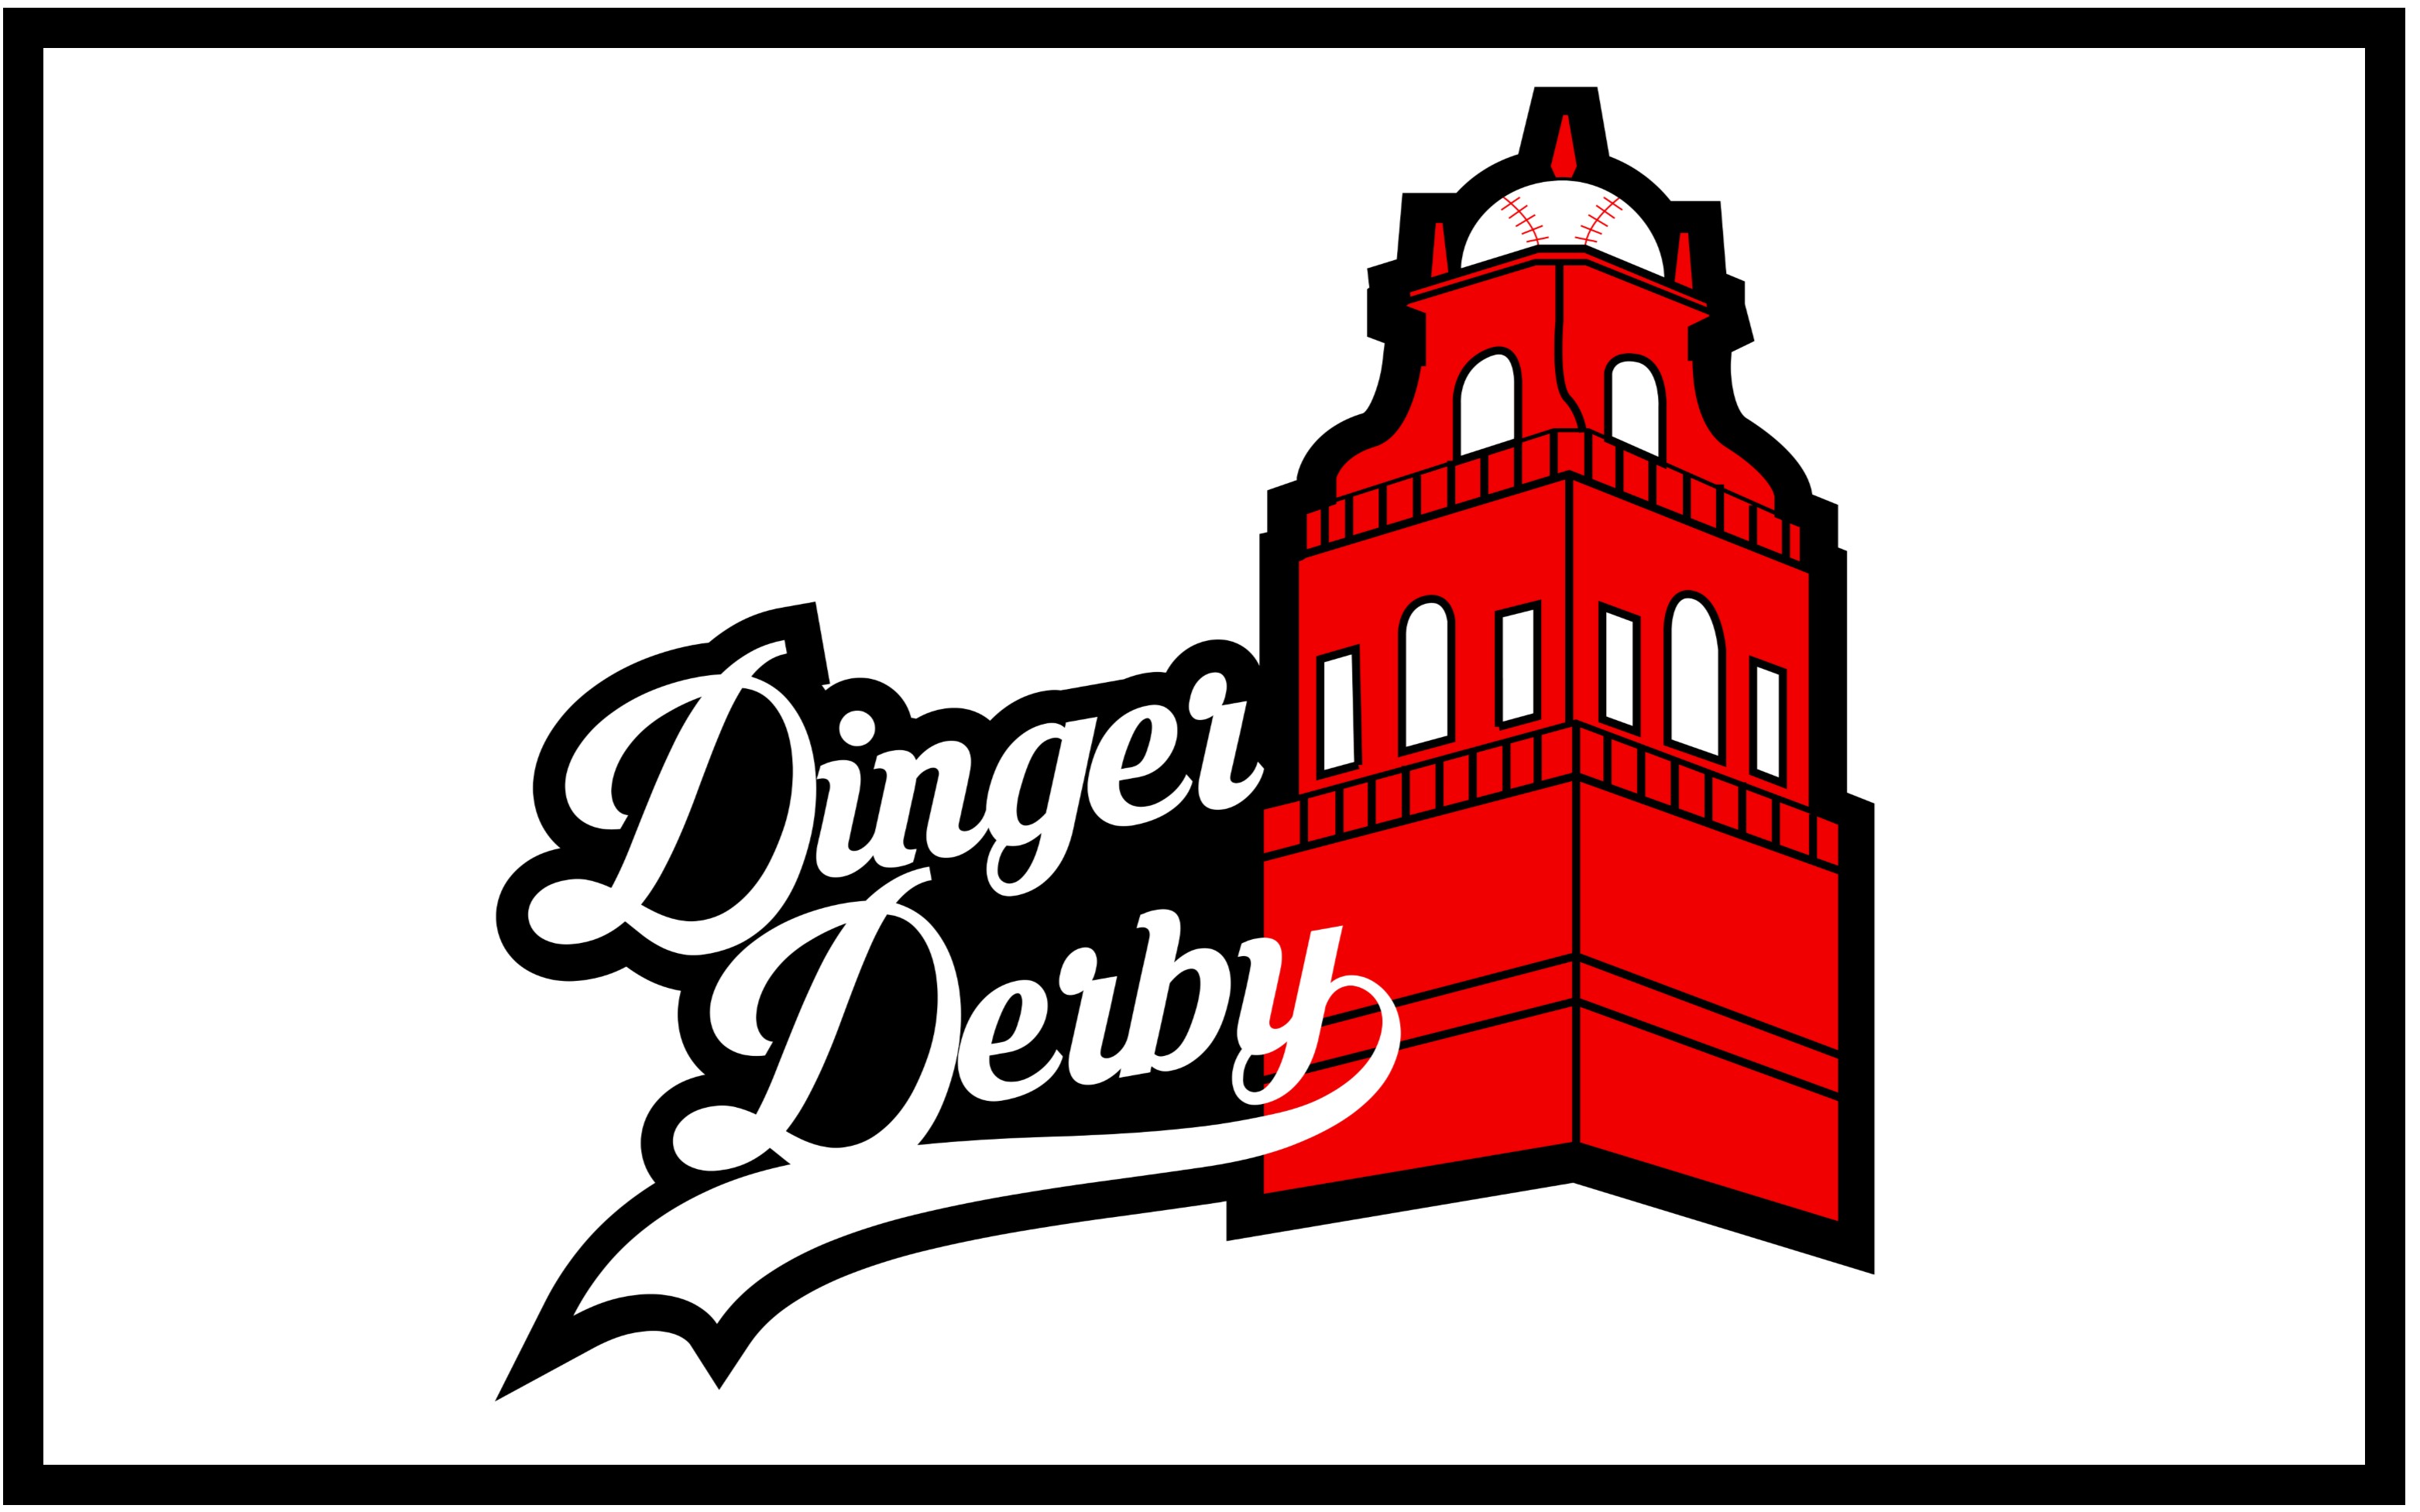 Opening Weekend Recap & Round Rock Preview | Dinger Derby Podcast